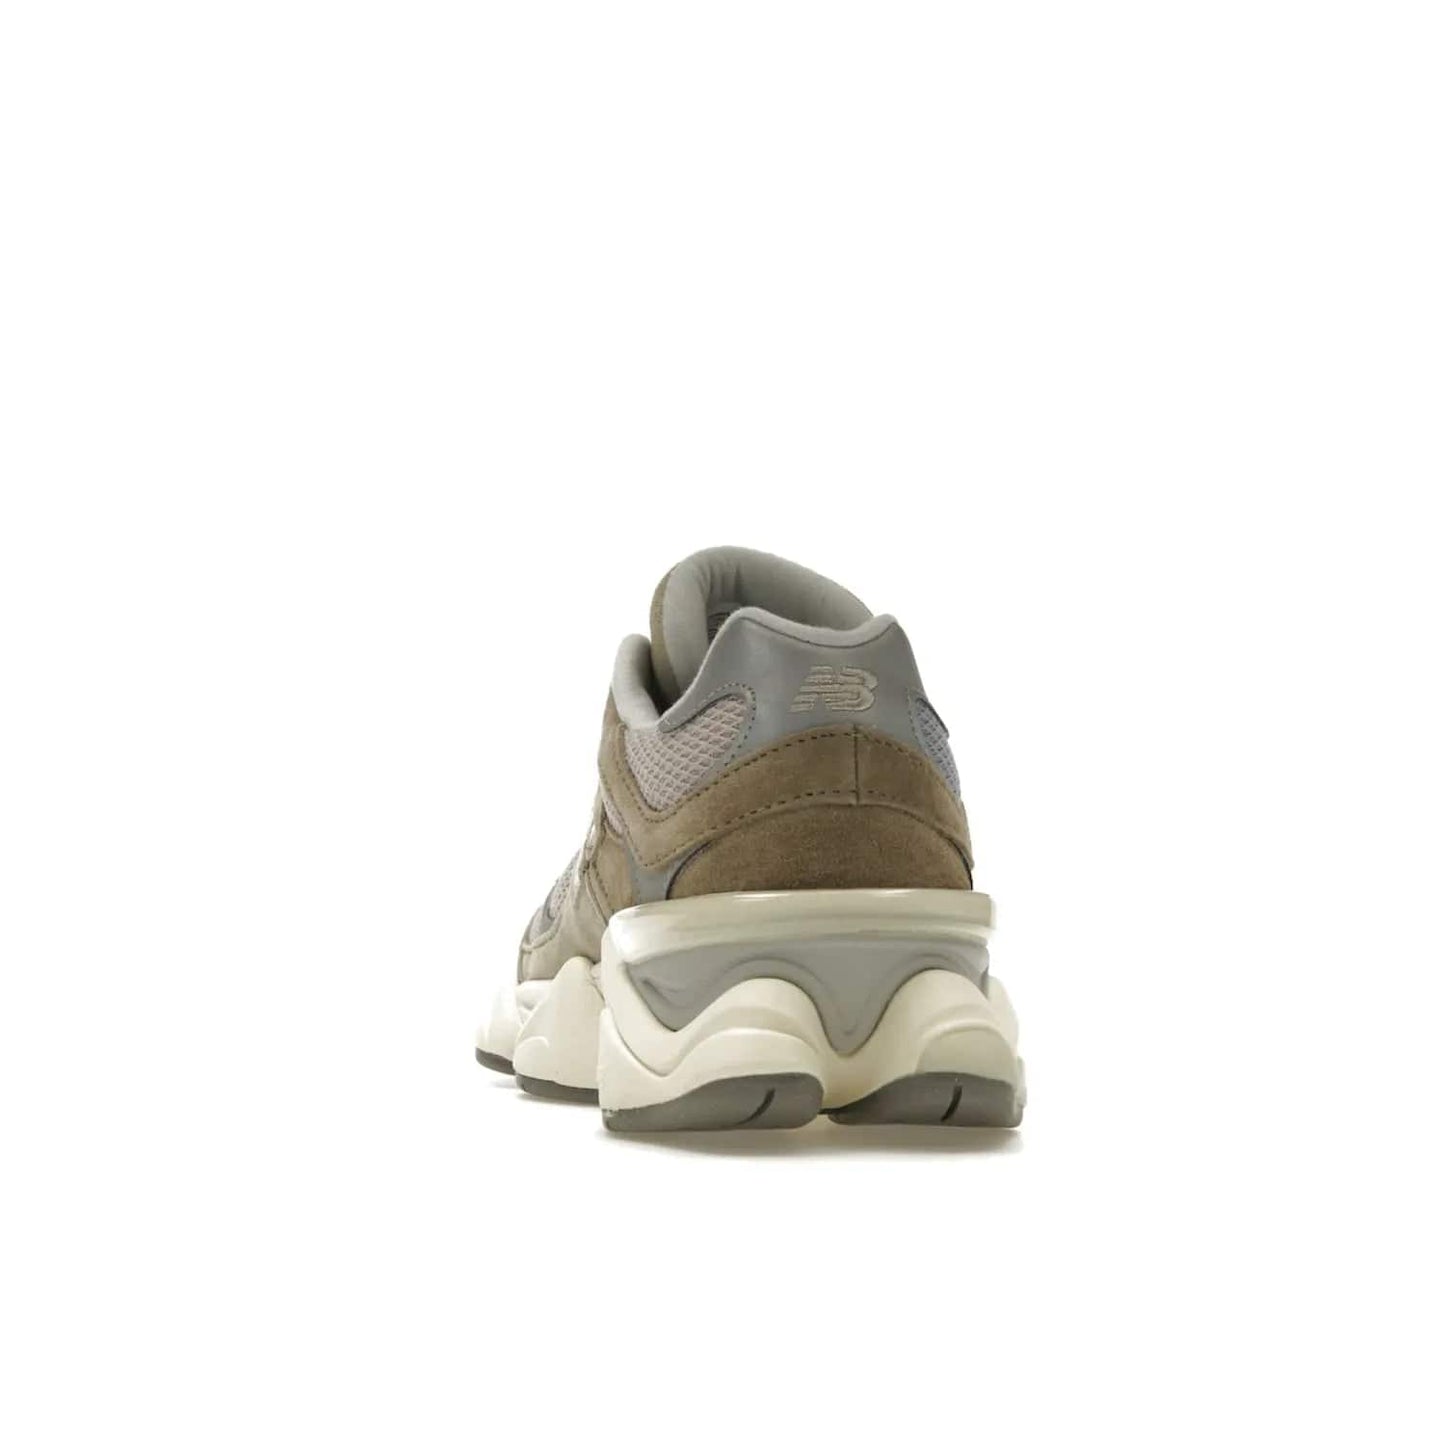 New Balance 9060 Mushroom - Image 27 - Only at www.BallersClubKickz.com - Get the New Balance 9060 Mushroom in stylish aluminum and mushroom tones. Featuring a porous mesh fabric with multiple suede overlays, a grey N symbol and rugged off-white/grey sole. Shop now and make a statement.